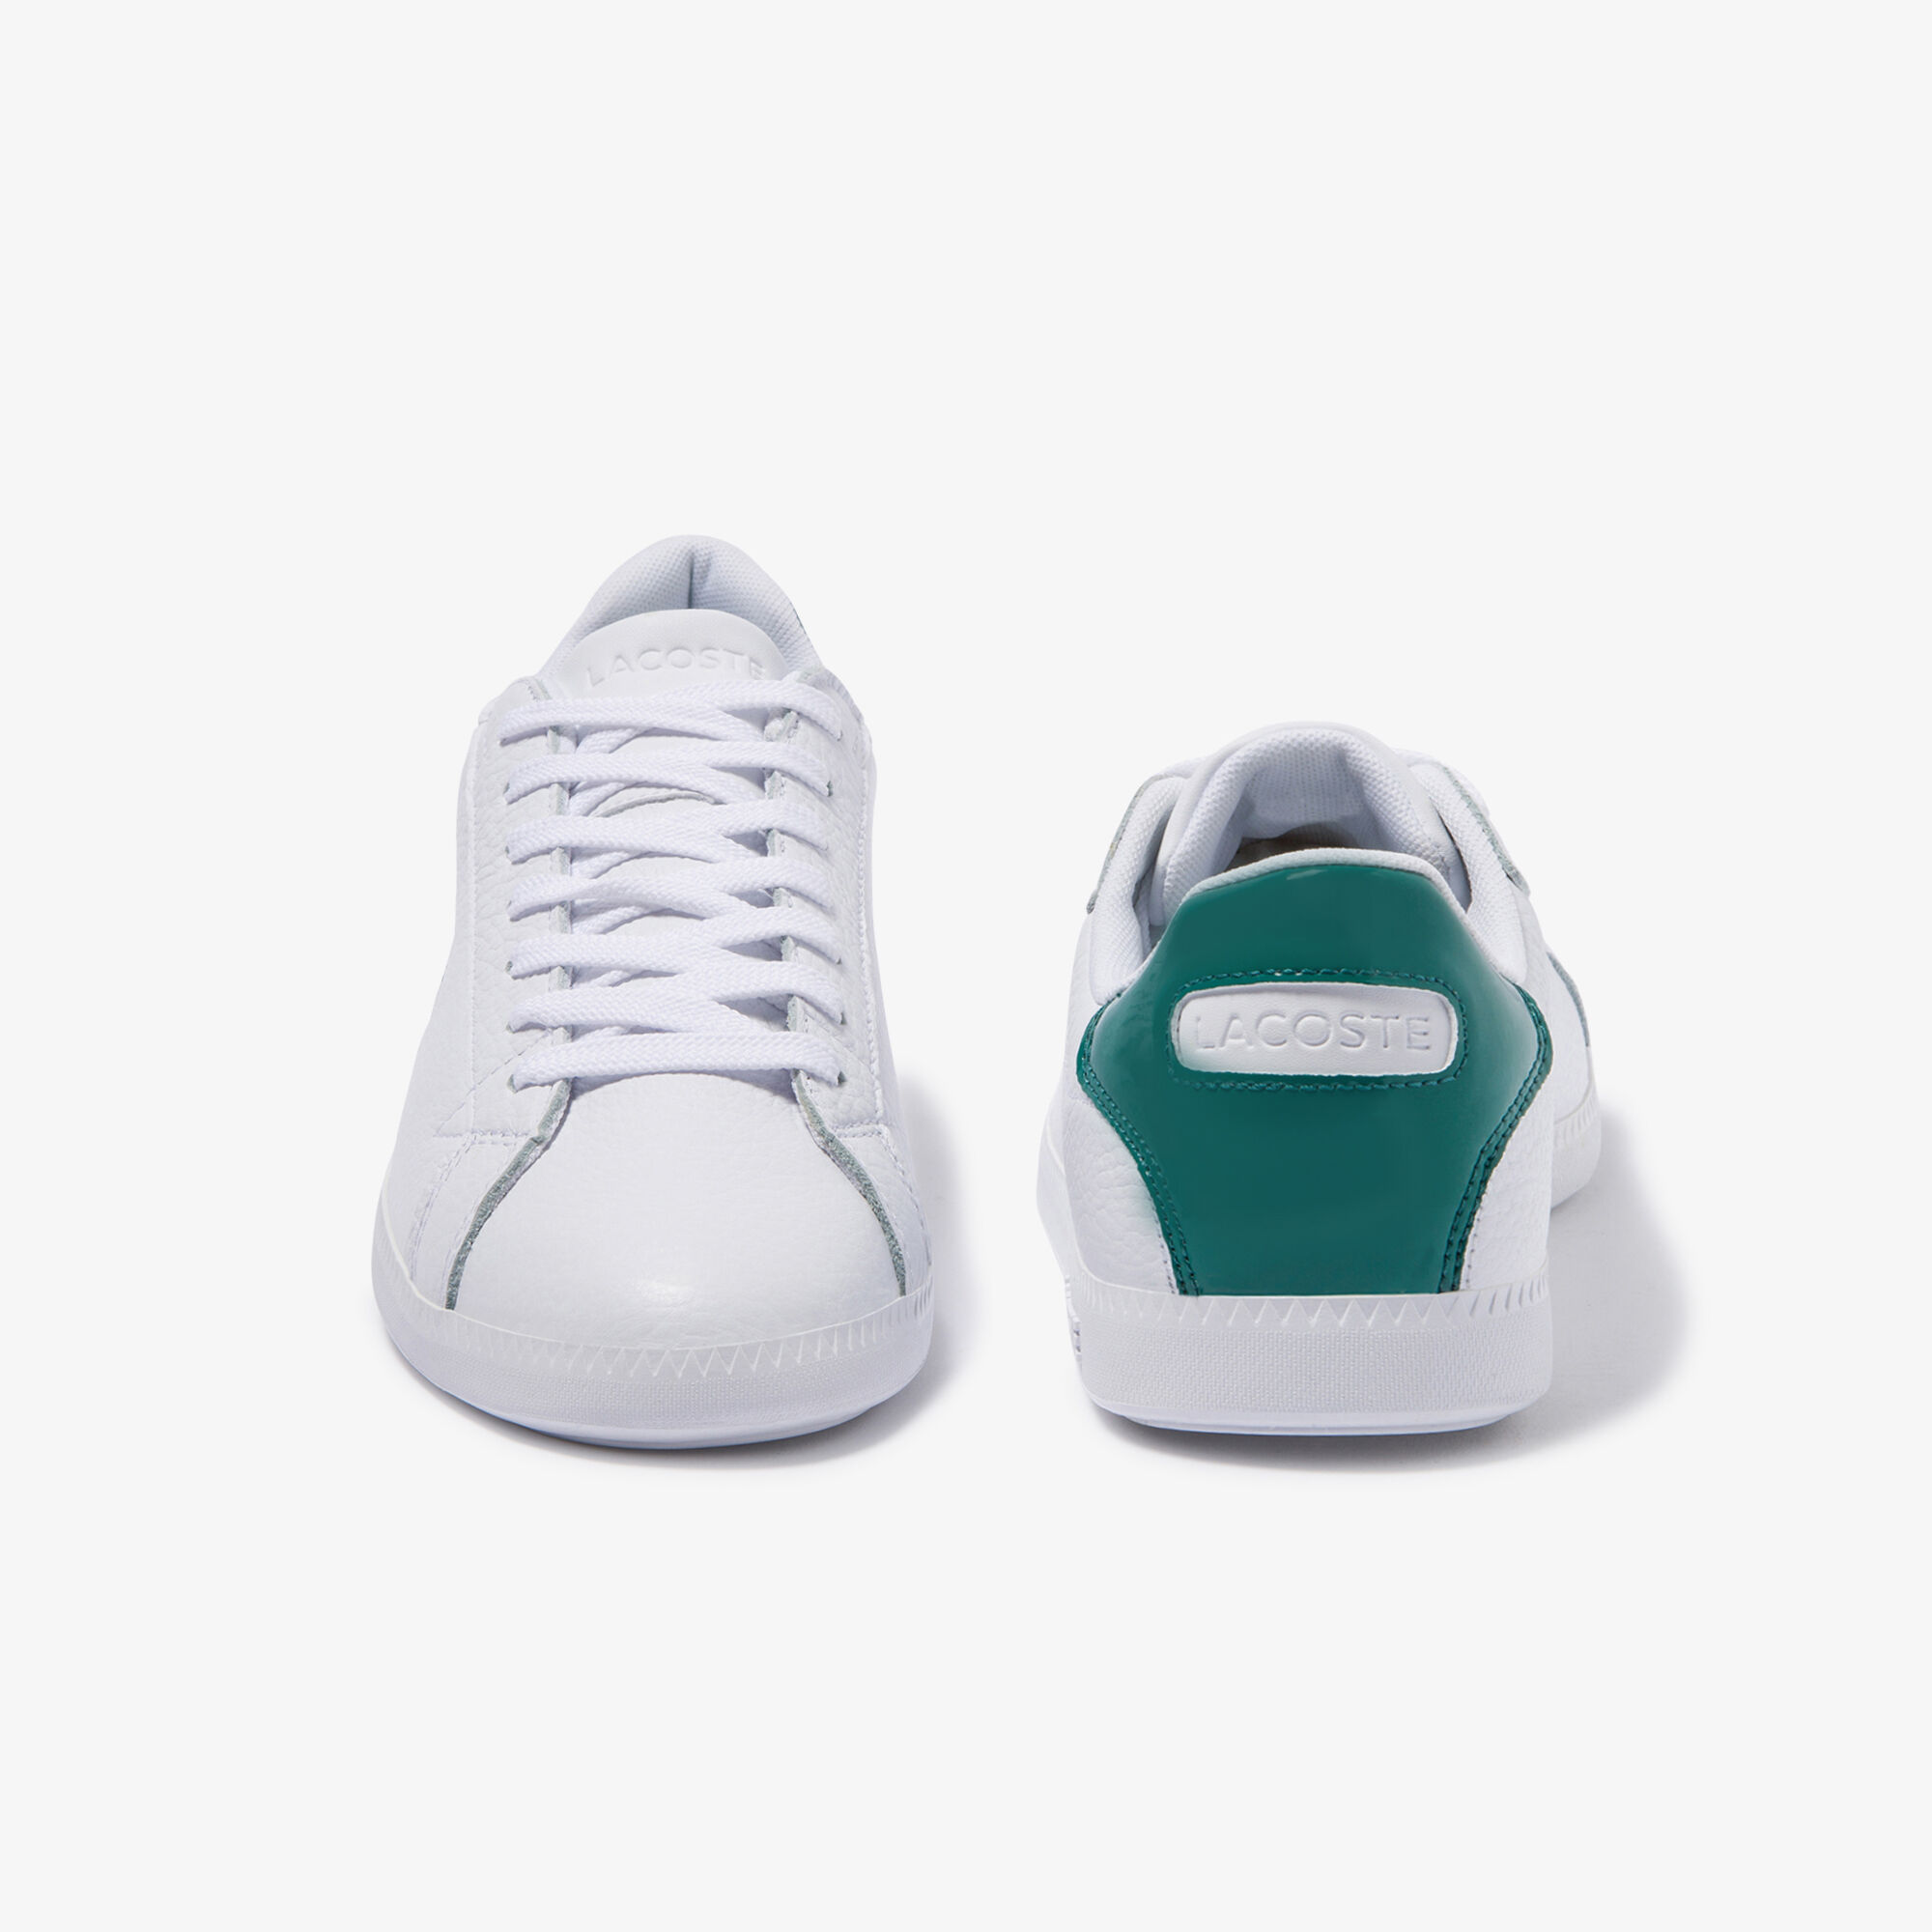 Men's Graduate Tumbled Leather and Synthetic Sneakers